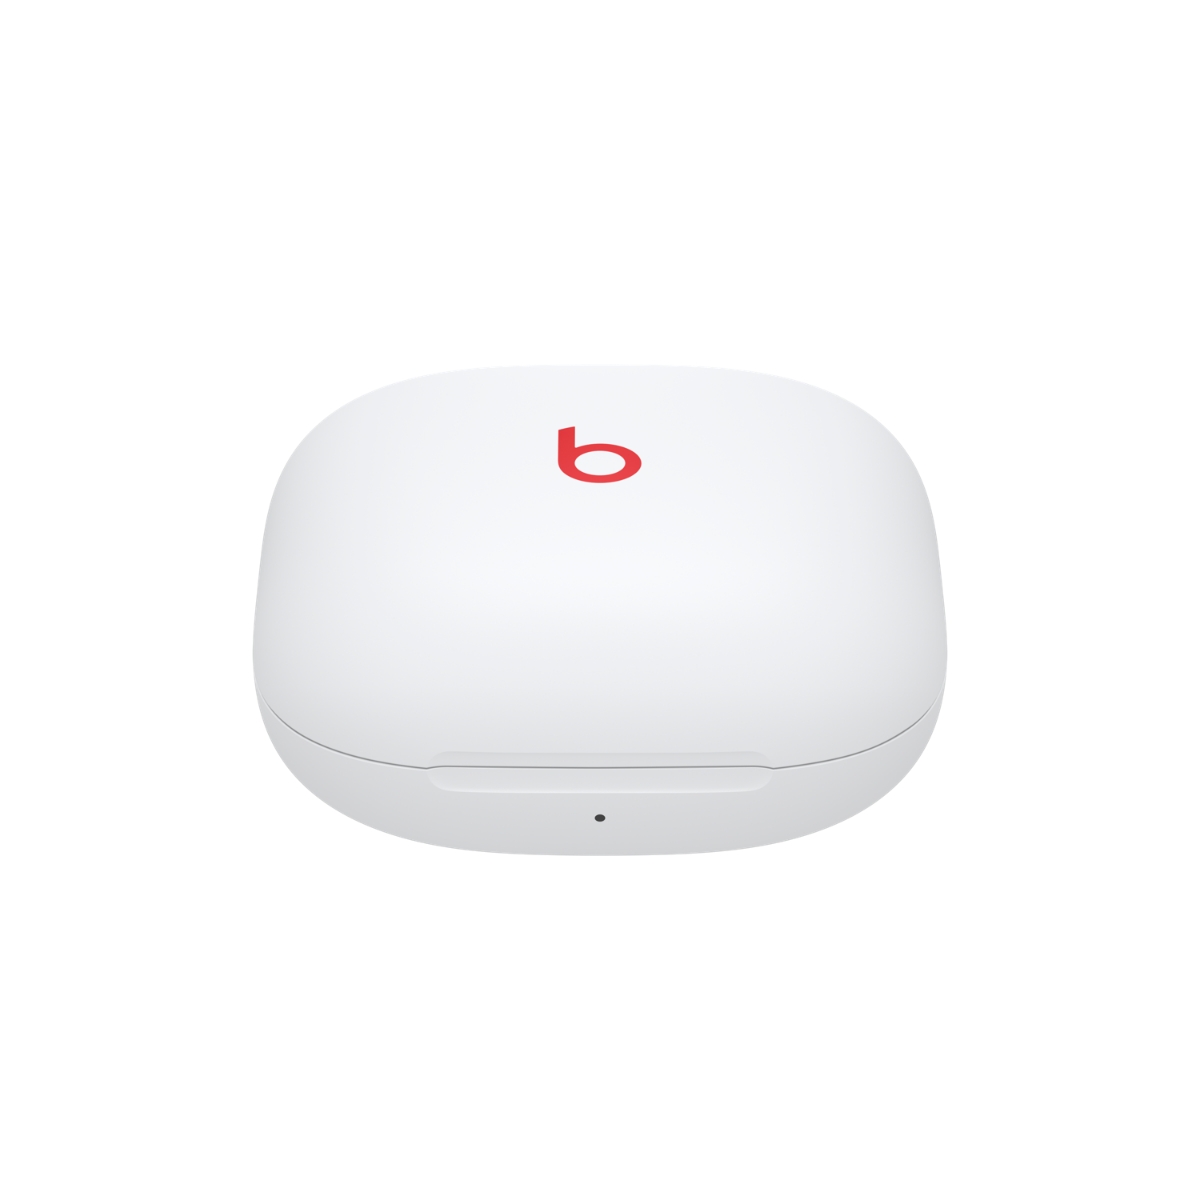 https://www.beatsbydre.com/content/dam/beats/web/product/earbuds/beats-fit-pro/pdp/product-carousel/white/pc-fit-pro-white-case-closed-front.jpg